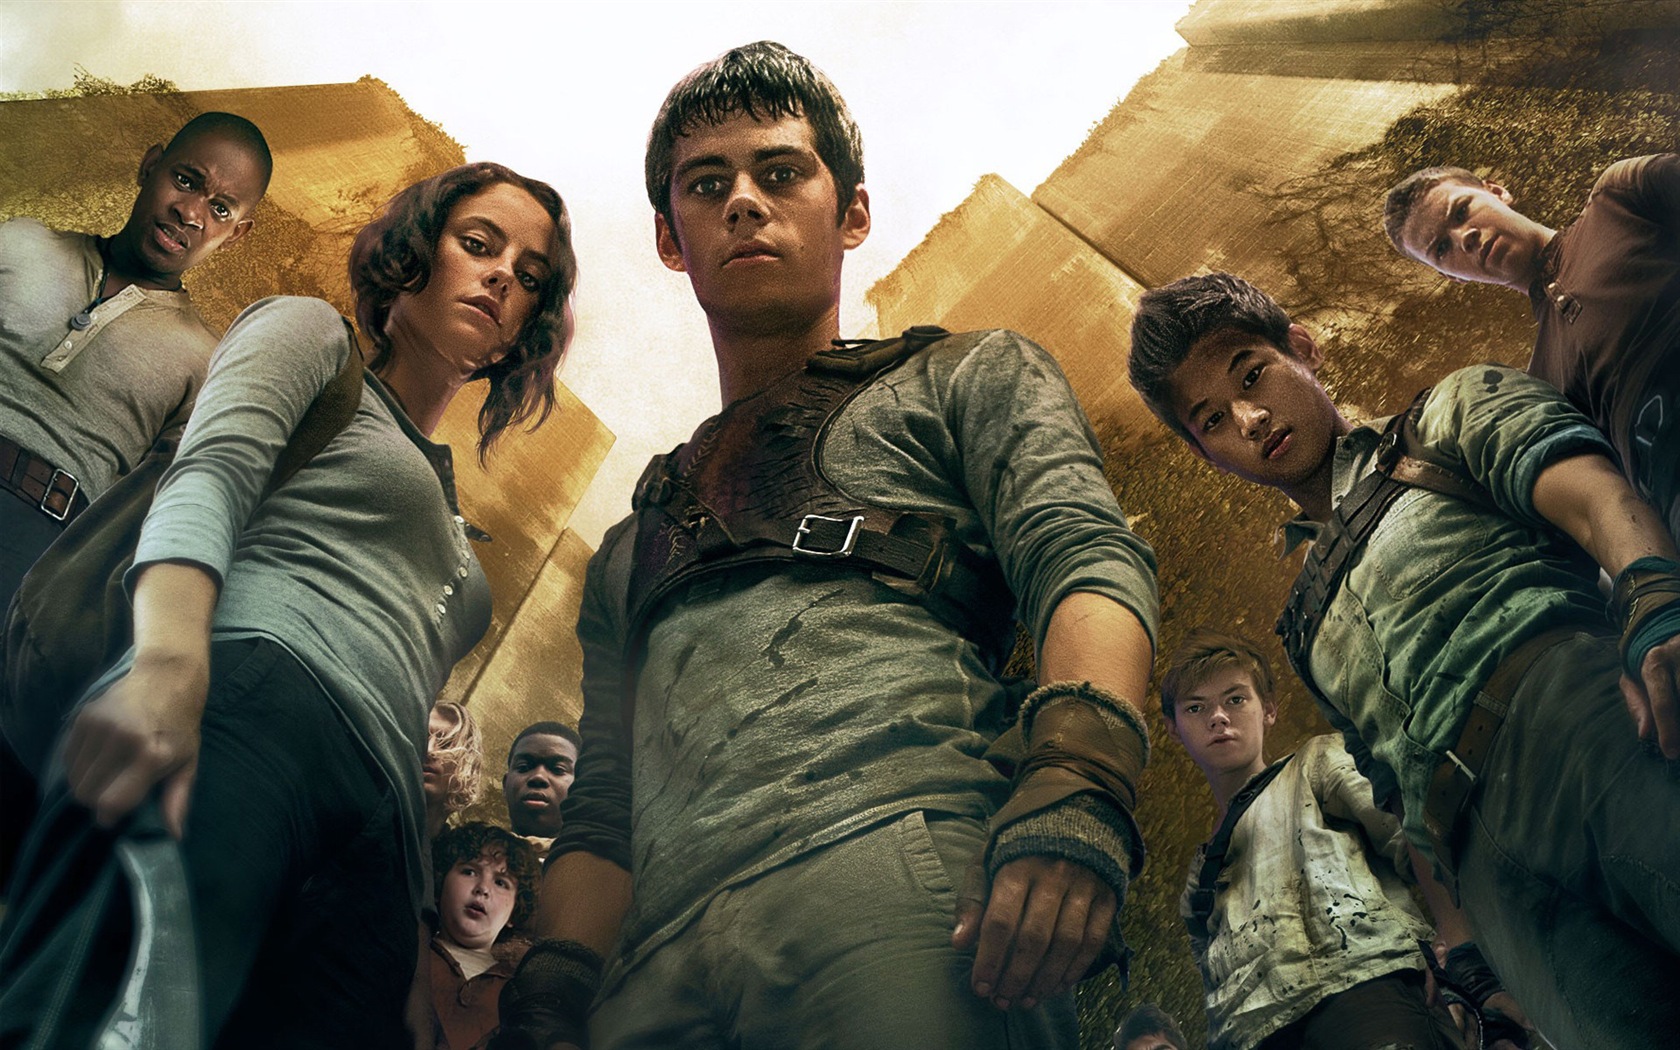 The Maze Runner HD movie wallpapers #3 - 1680x1050